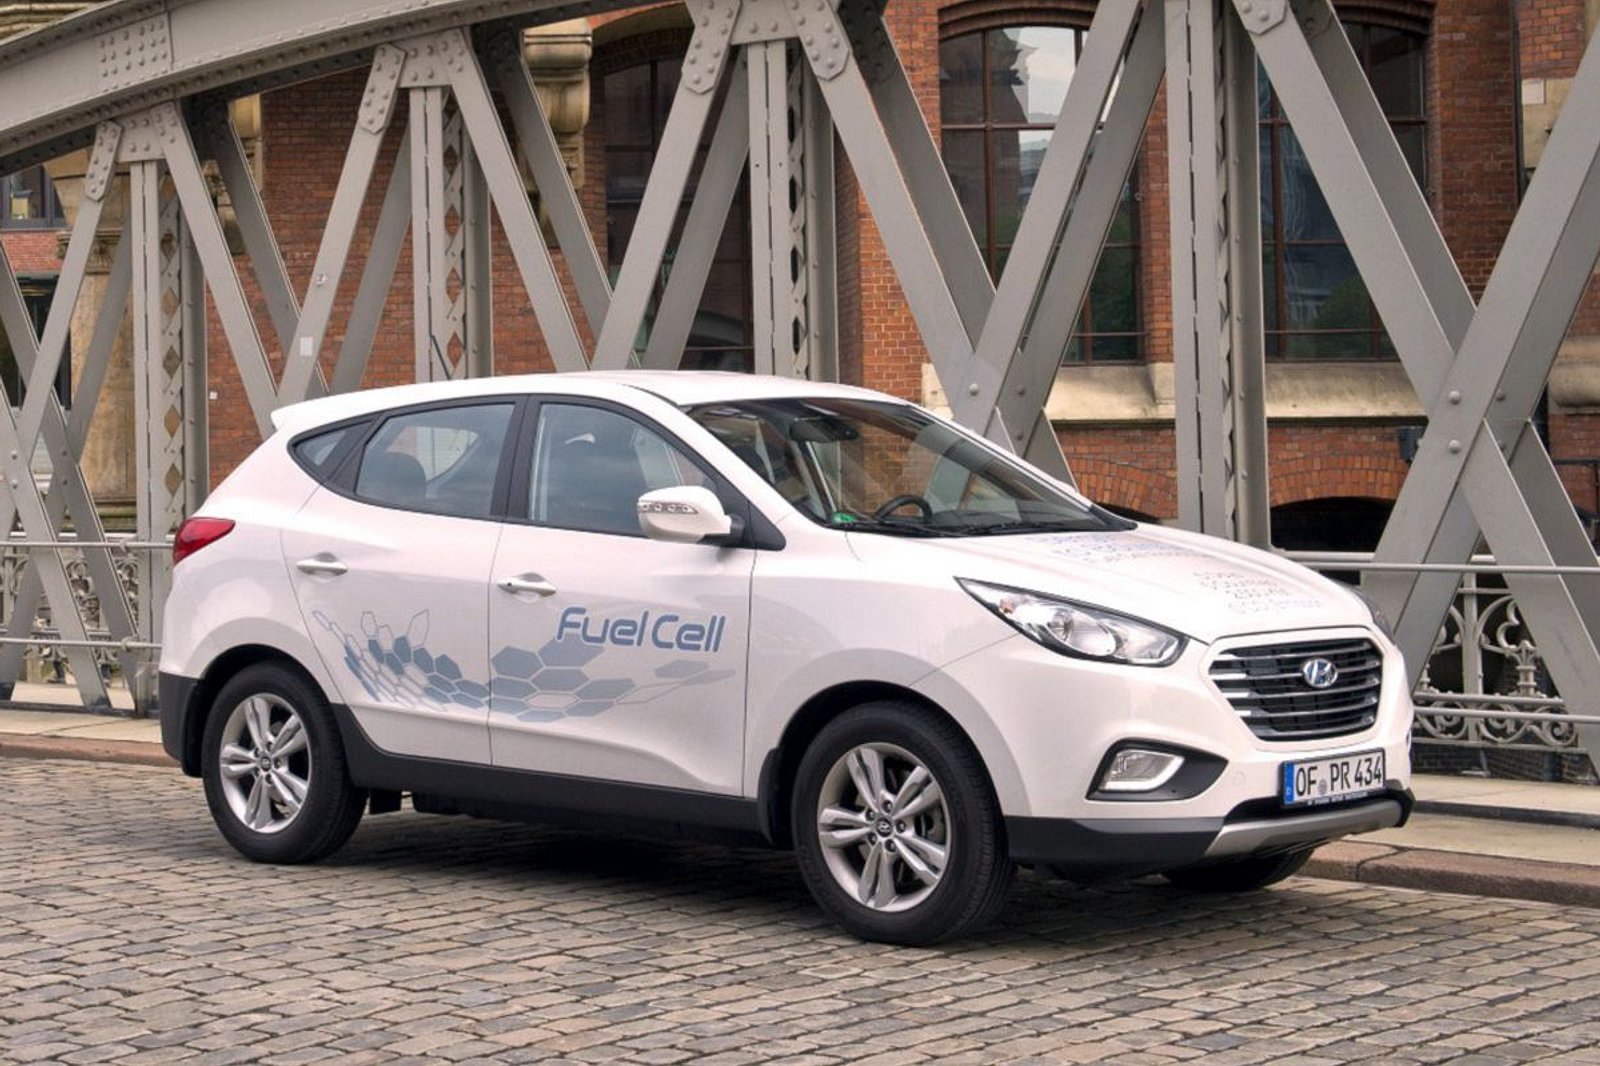 Owner Of Hydrogen-Powered Hyundai Tucson Faced With $113,500